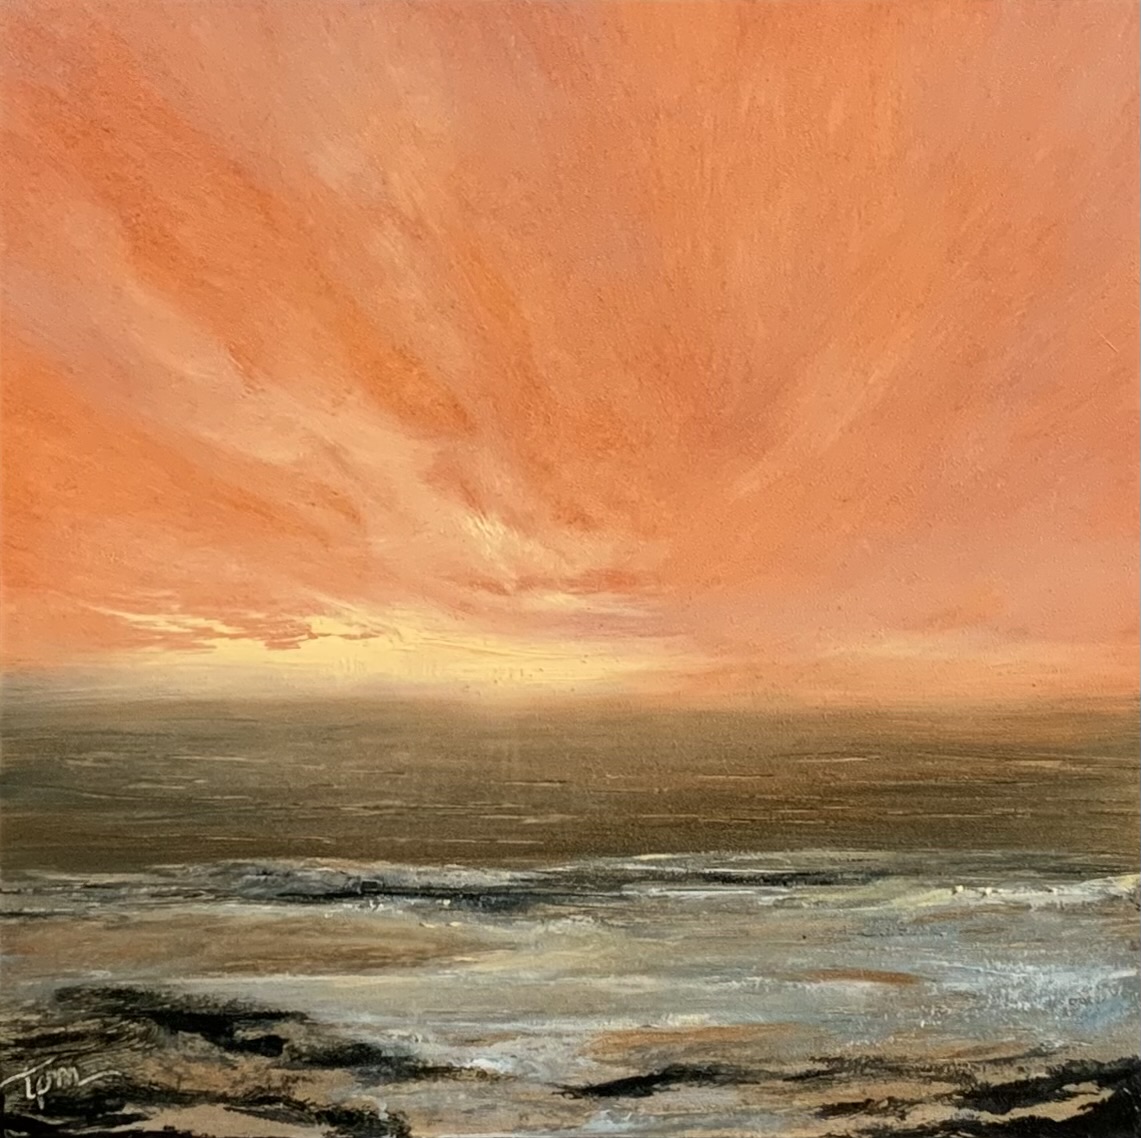 Original seascape oil painting by Tisha Mark, "Week 19, 52 Weeks of Finding Light Series, 5"x5" oil on cradled GEssobord (2023). Painting of a seascape with a fiery orange sky, with yellow light at the horizon. Light reflects off of the sea as the waves meet the rocky shore.